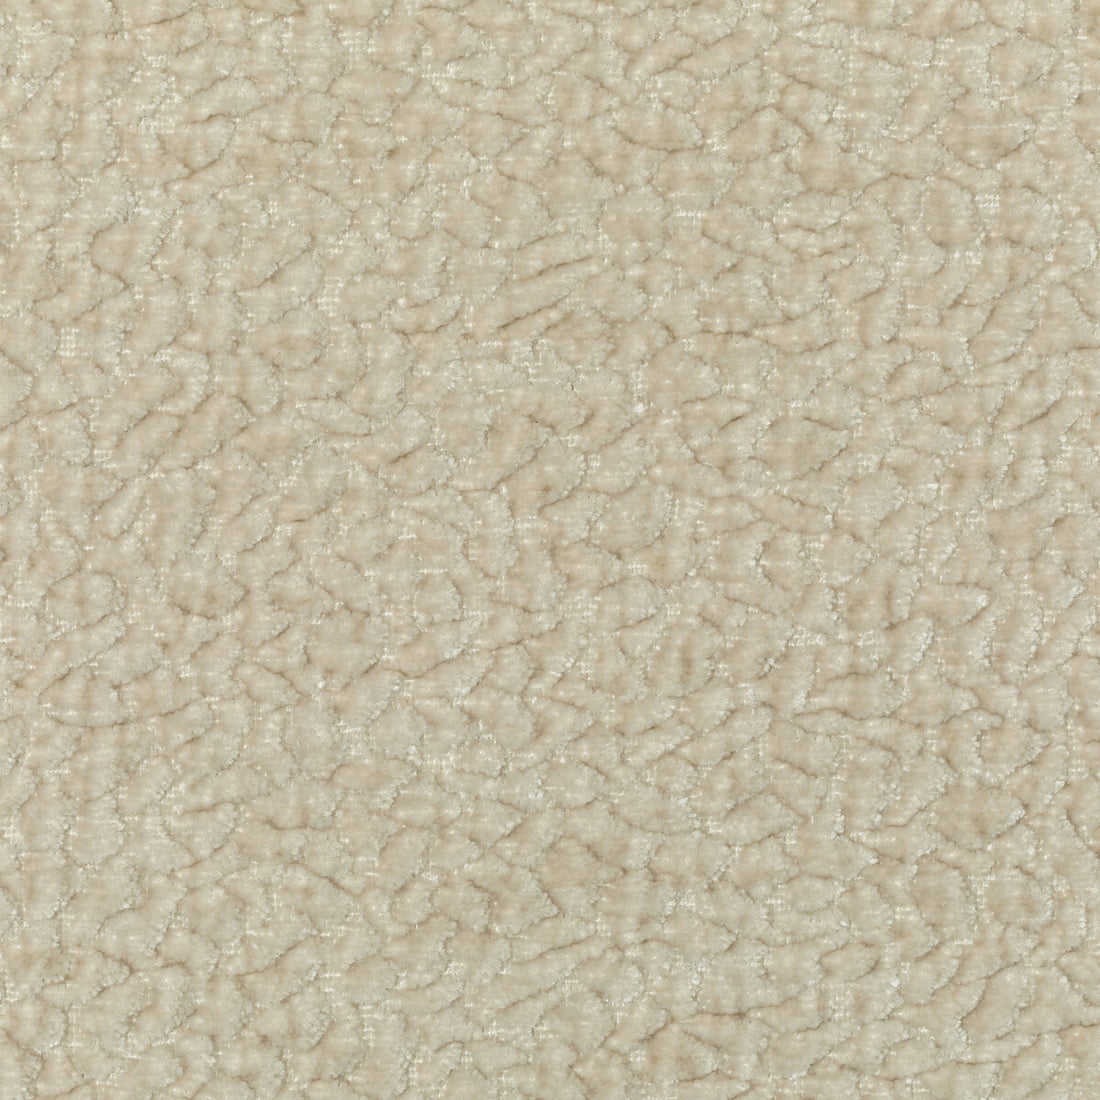 Barton Chenille fabric in sand color - pattern 36074.1.0 - by Kravet Smart